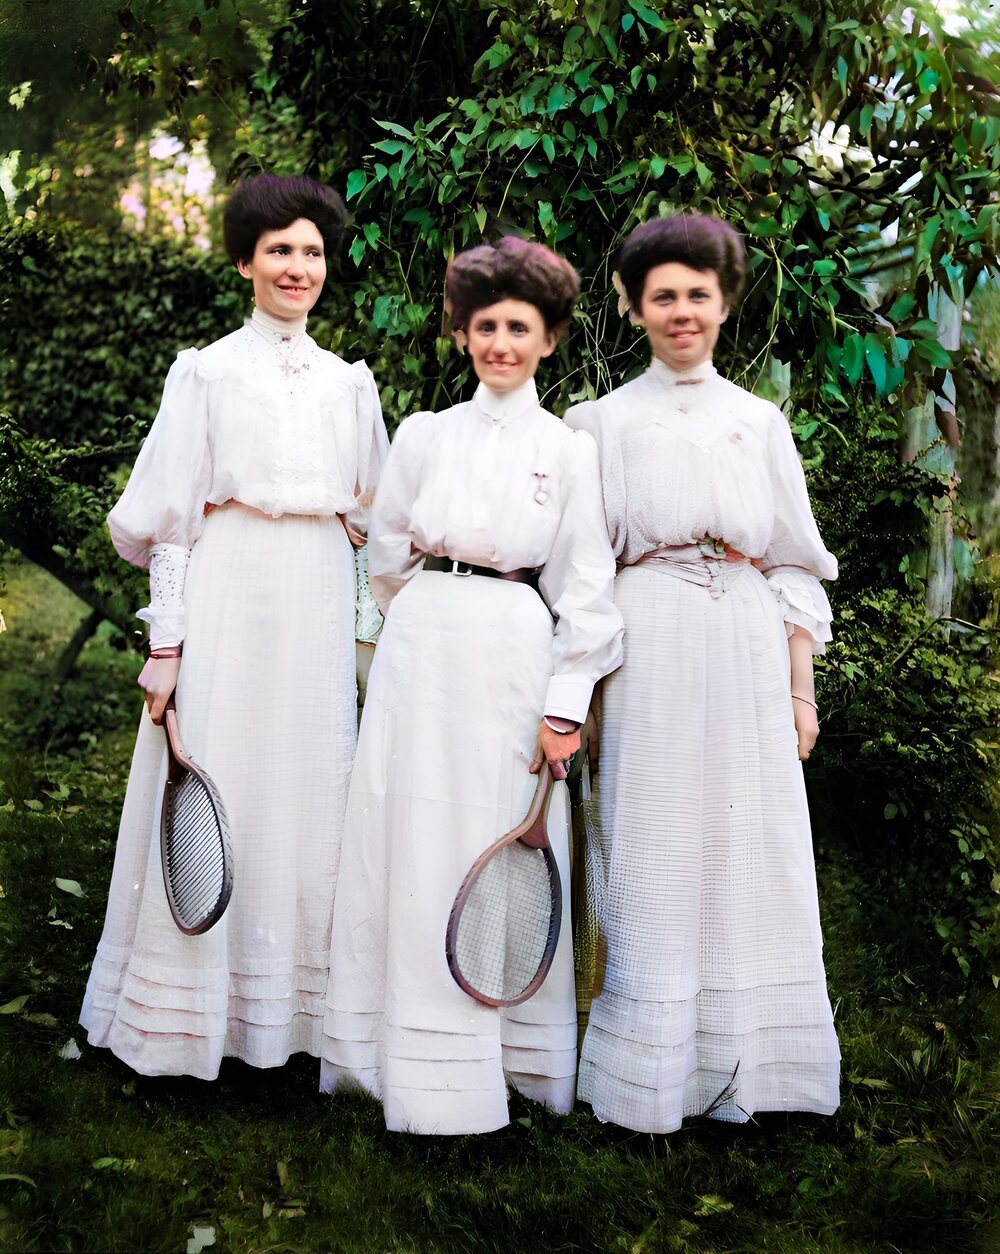 Three young women in light dresses holding tennis racquets, 1900